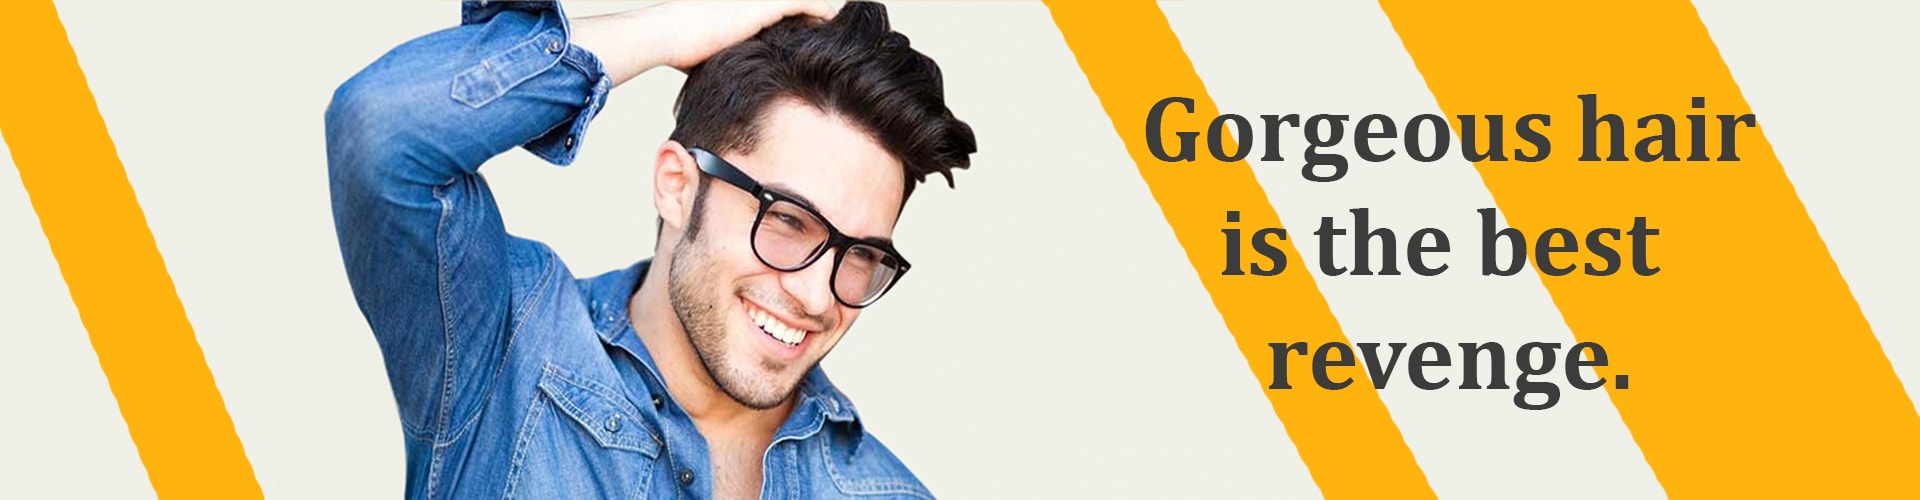 Hair Extension in Bangalore